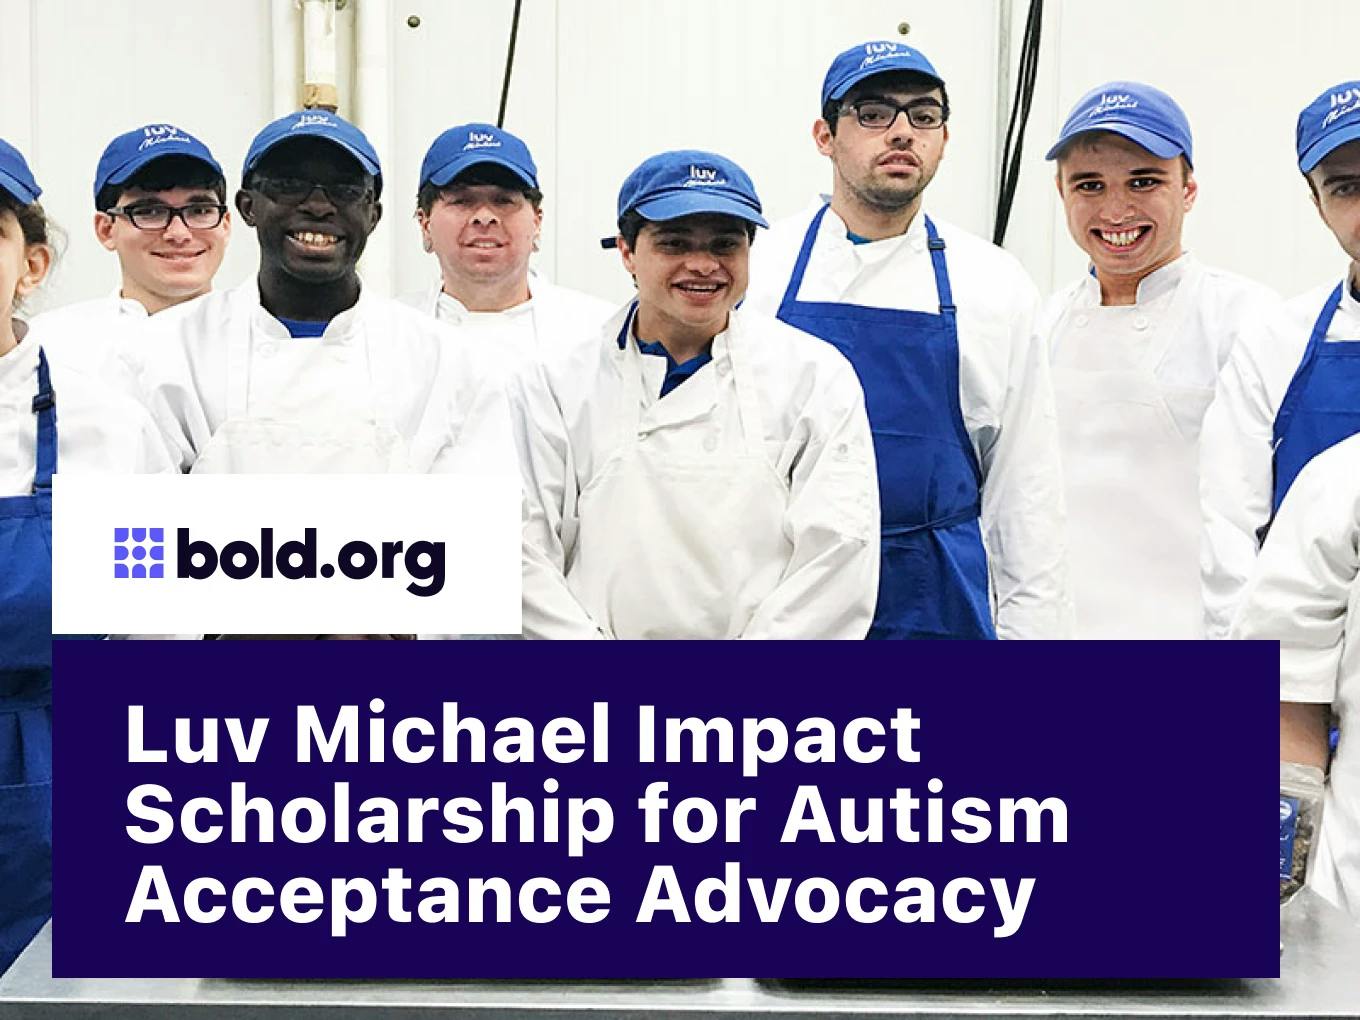 Luv Michael Impact Scholarship for Autism Acceptance Advocacy